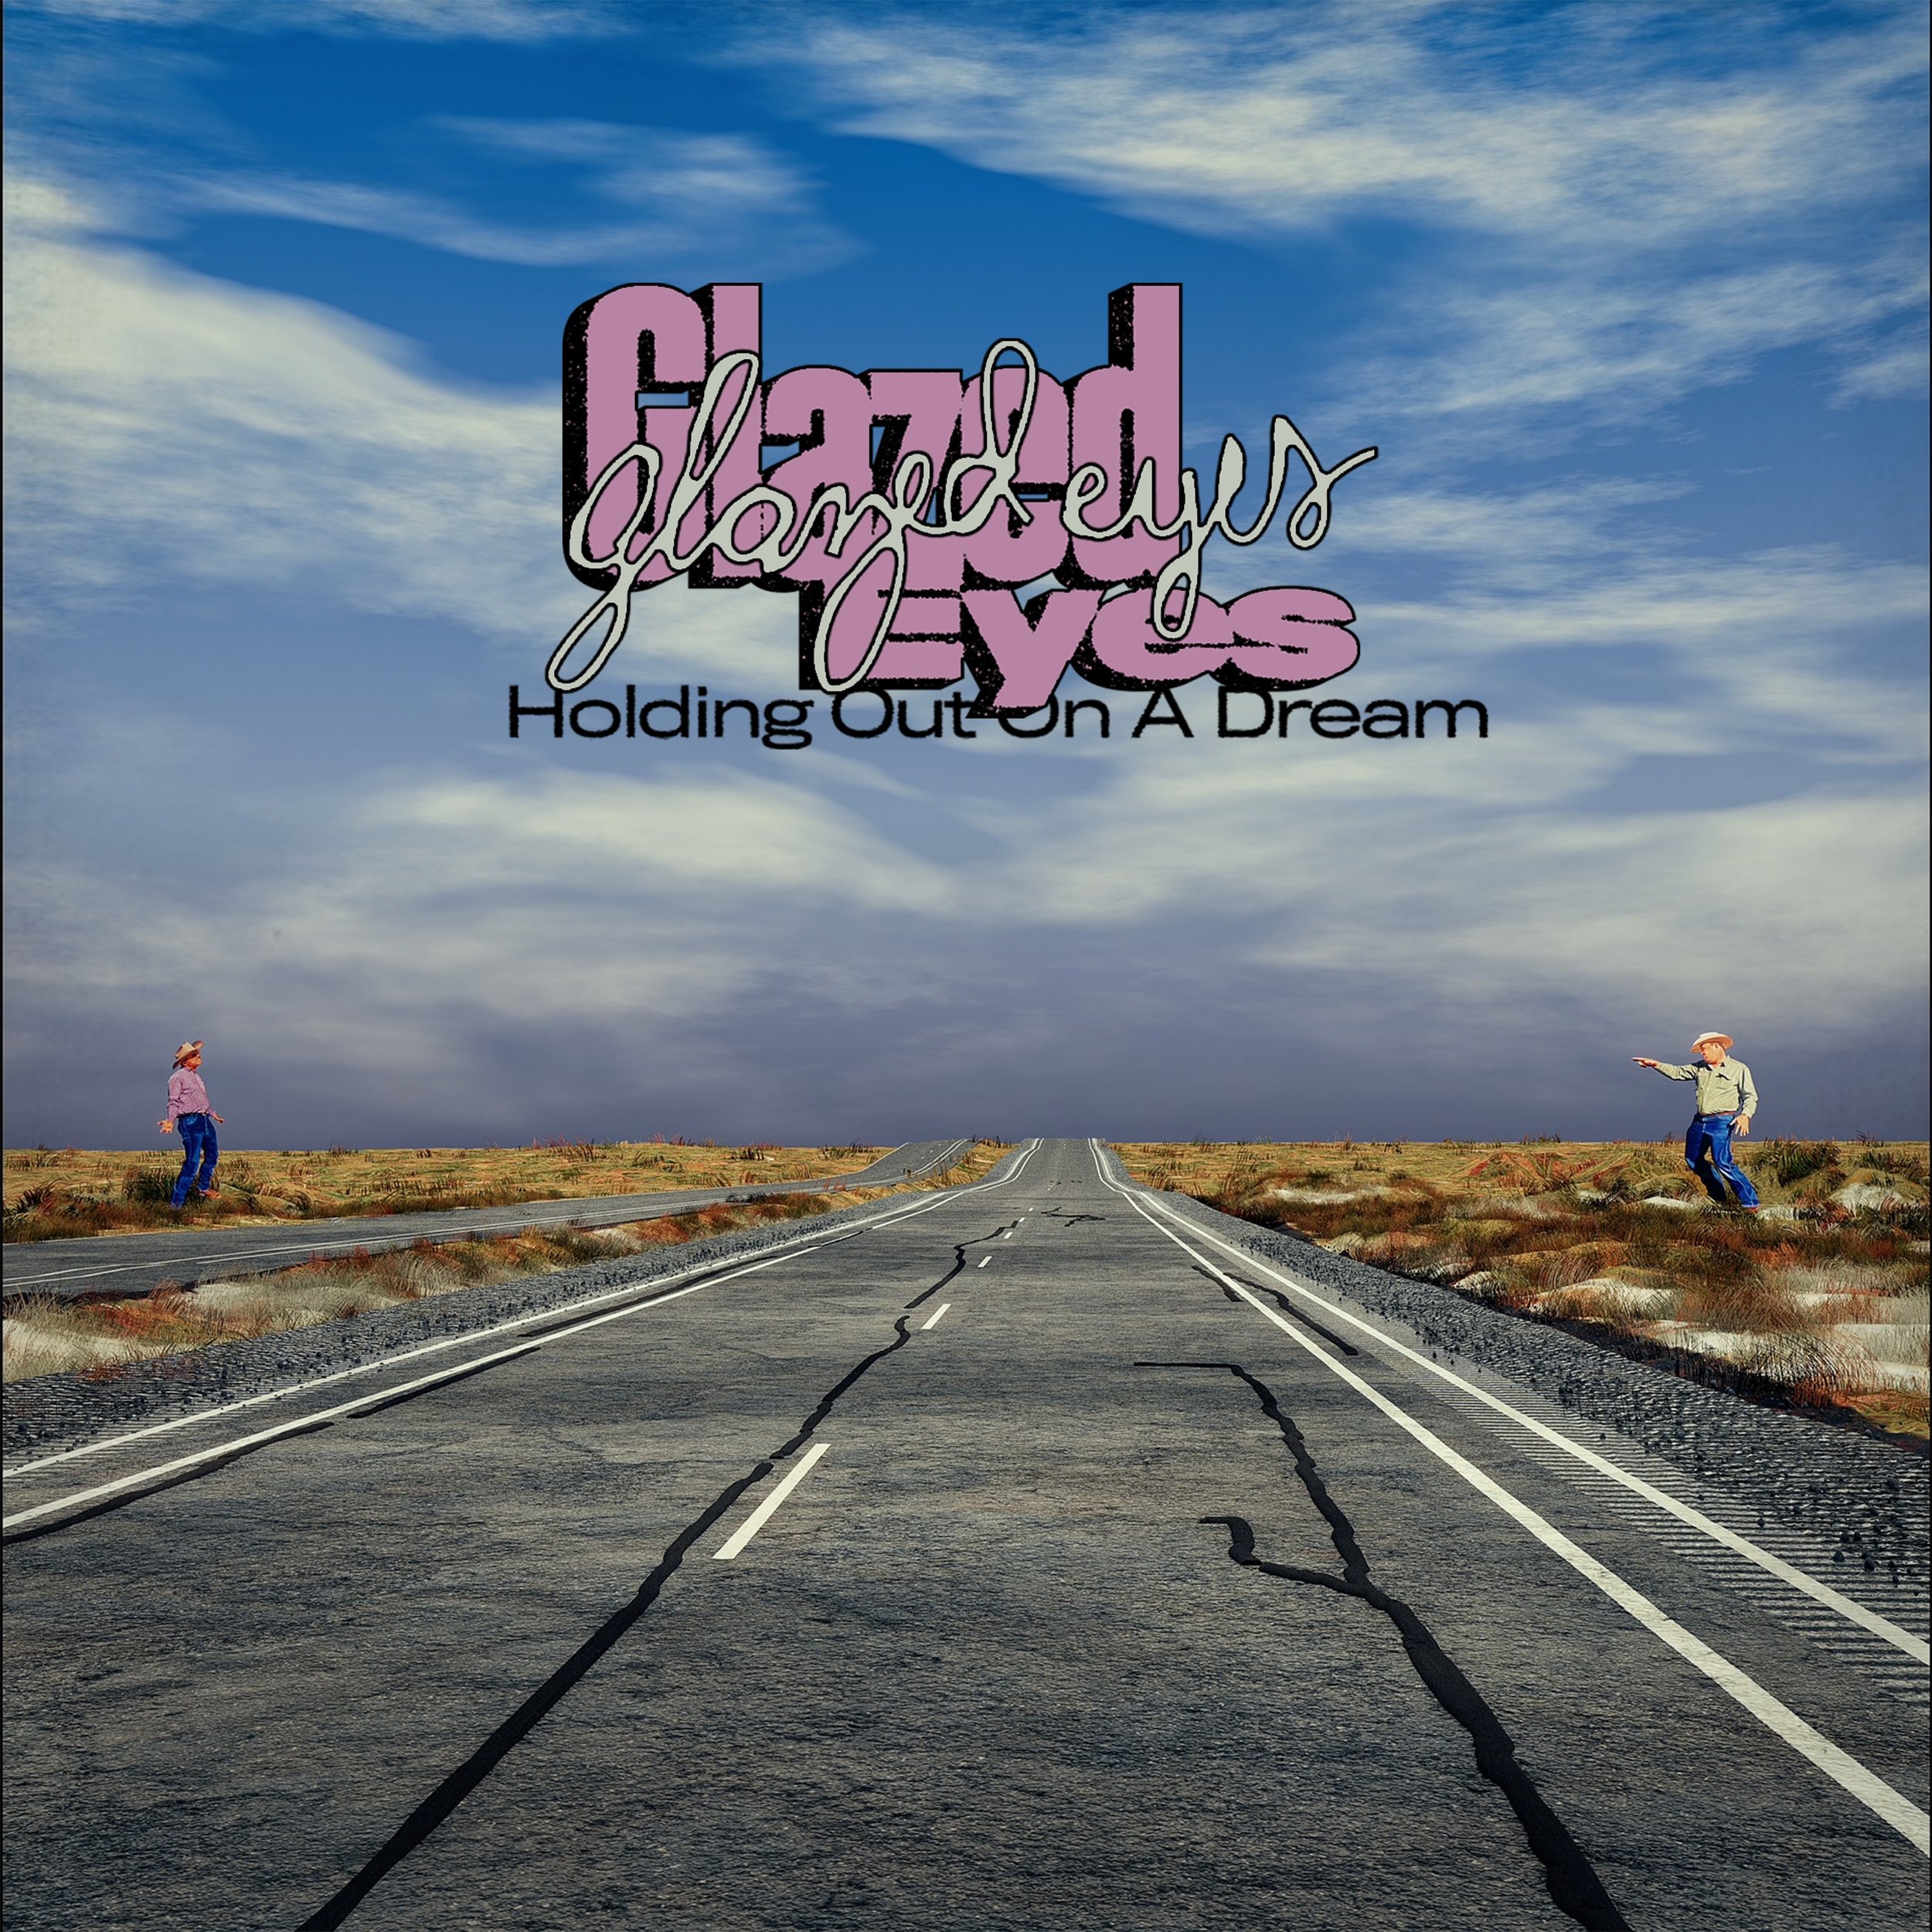 Glazed Eyes - Holding Out On A Dream - Cover.jpg